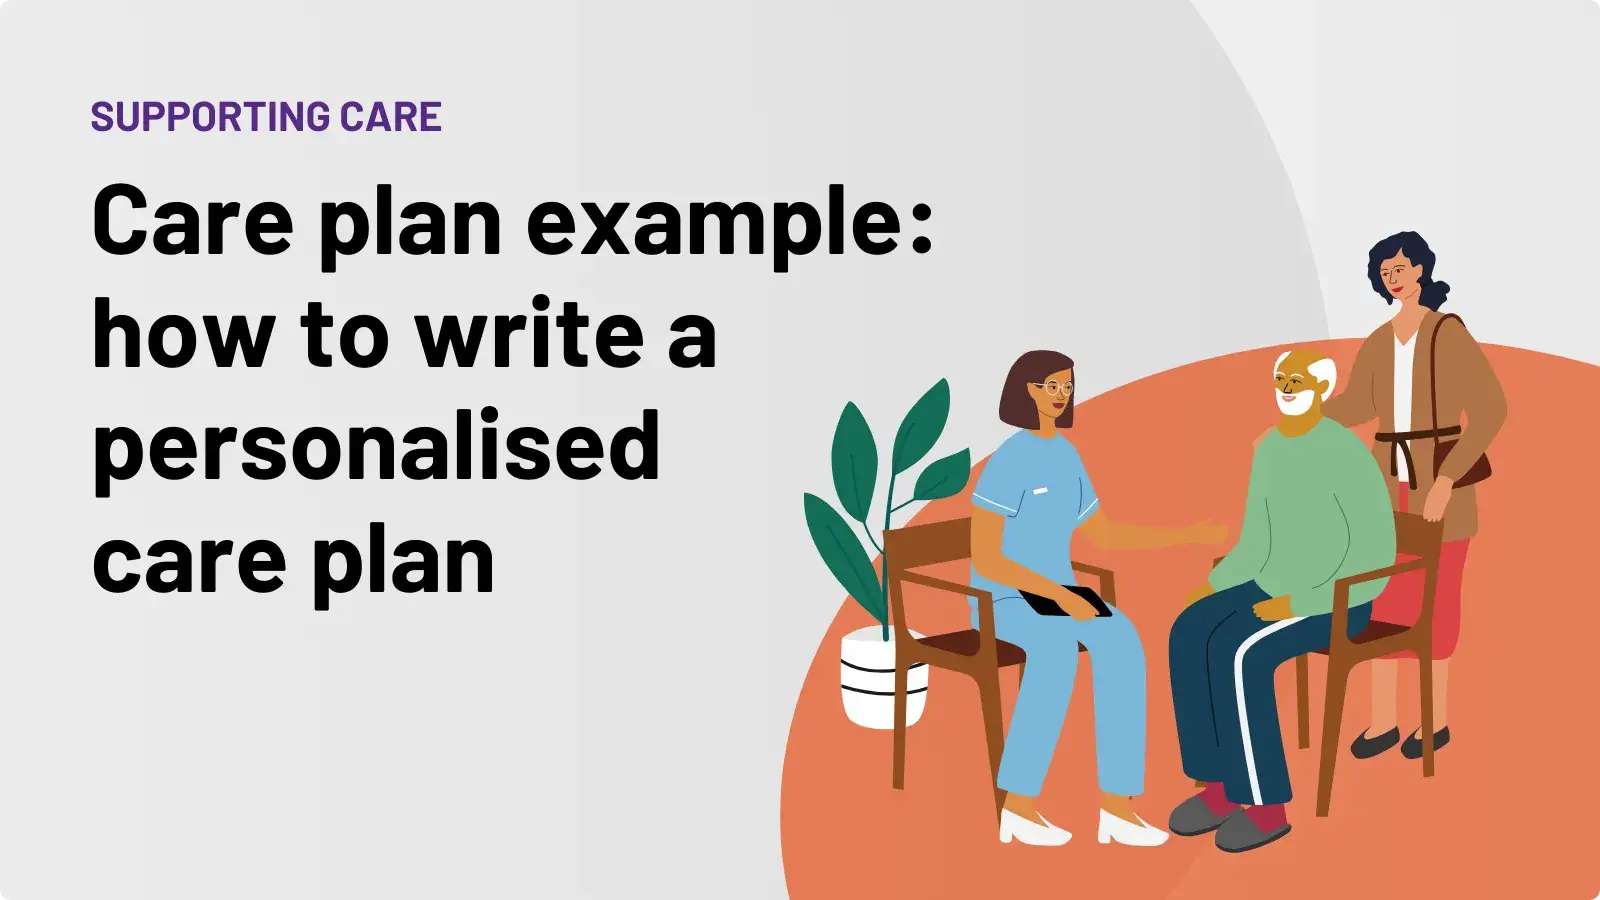 Care plan example: how to write a personalised care plan cover photo